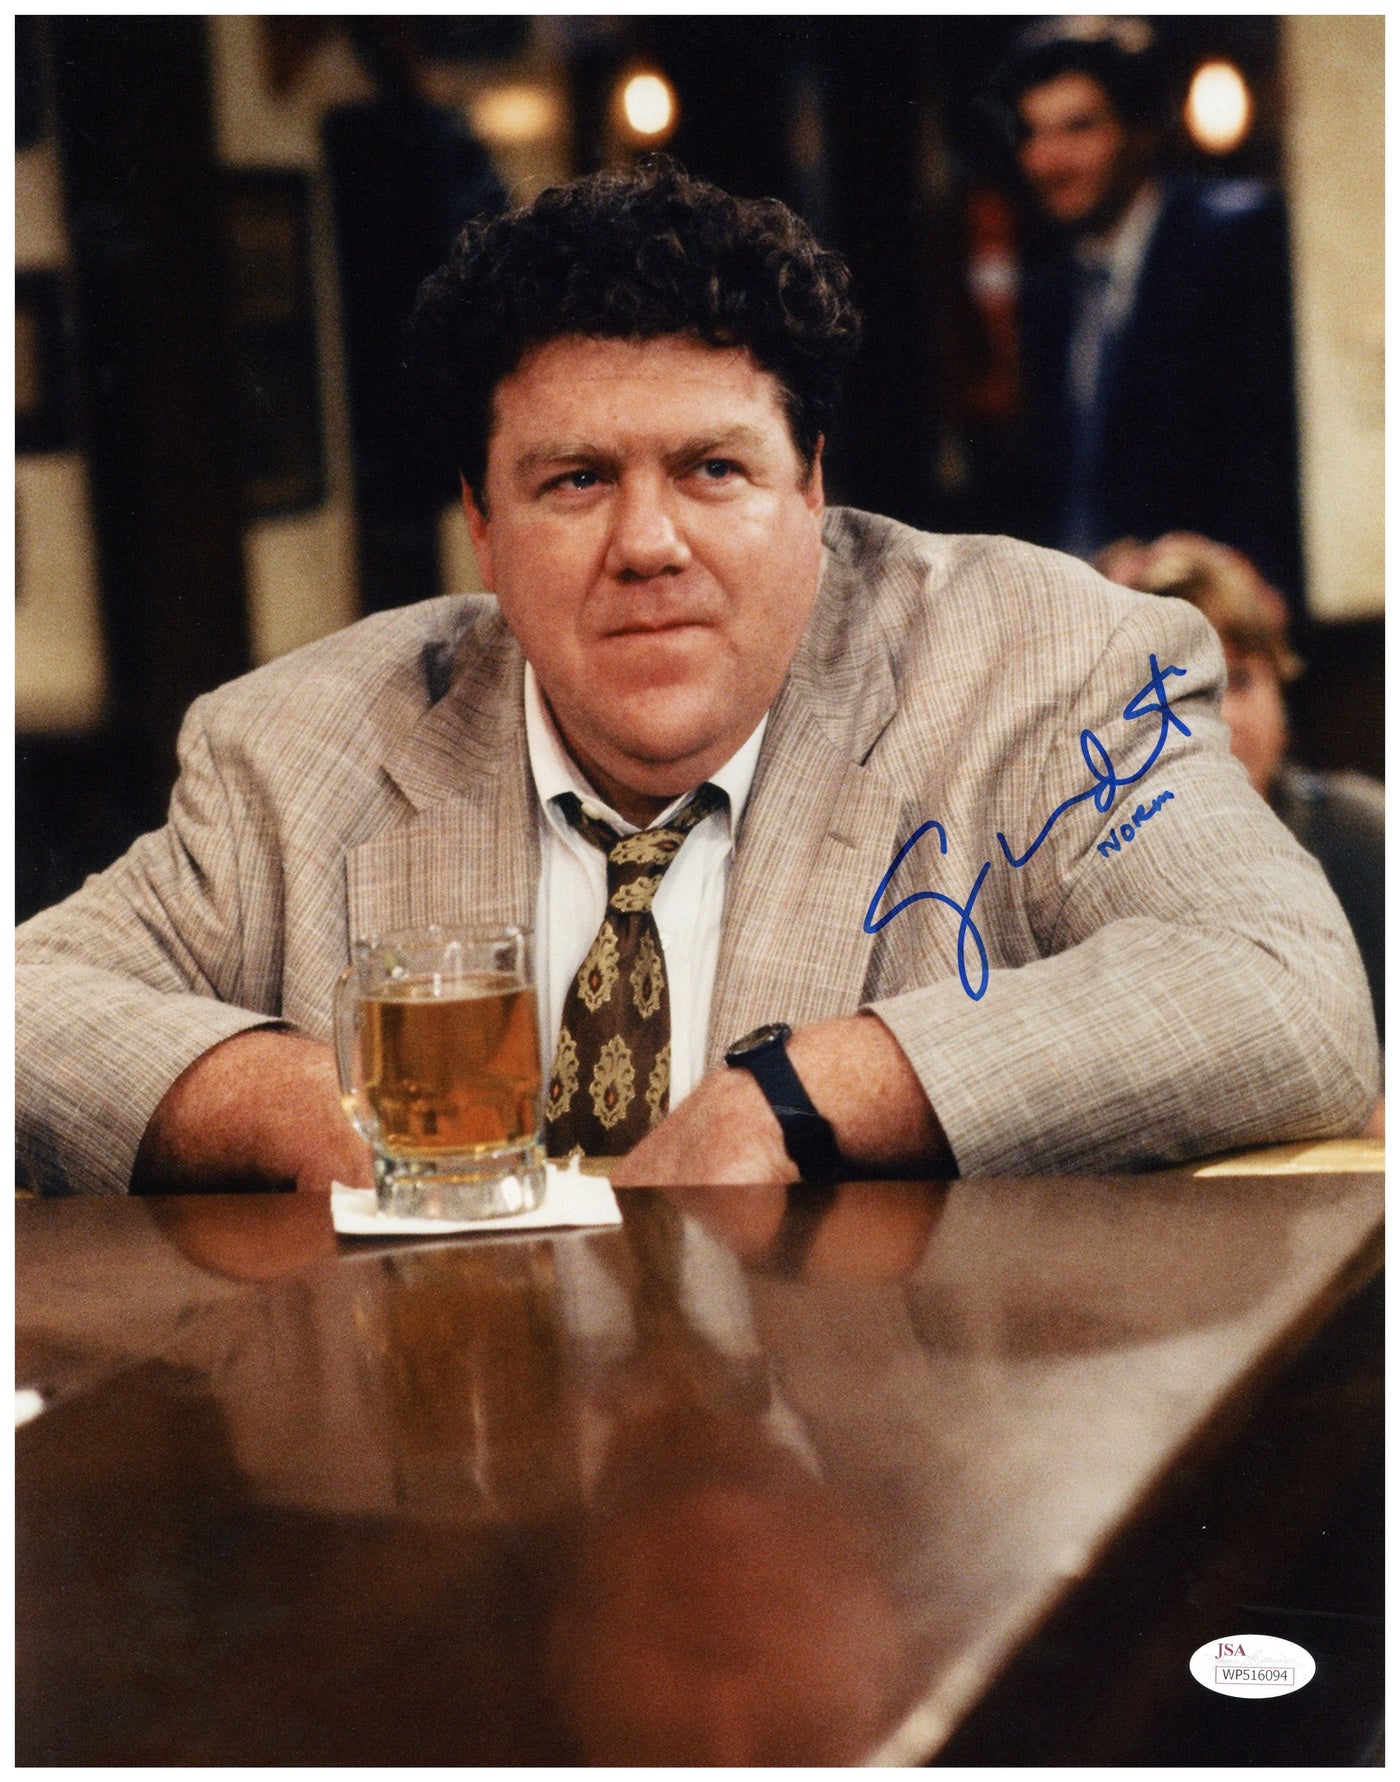 GEORGE WENDT Signed 11x14 Photo Cheers Authentic Autographed JSA COA